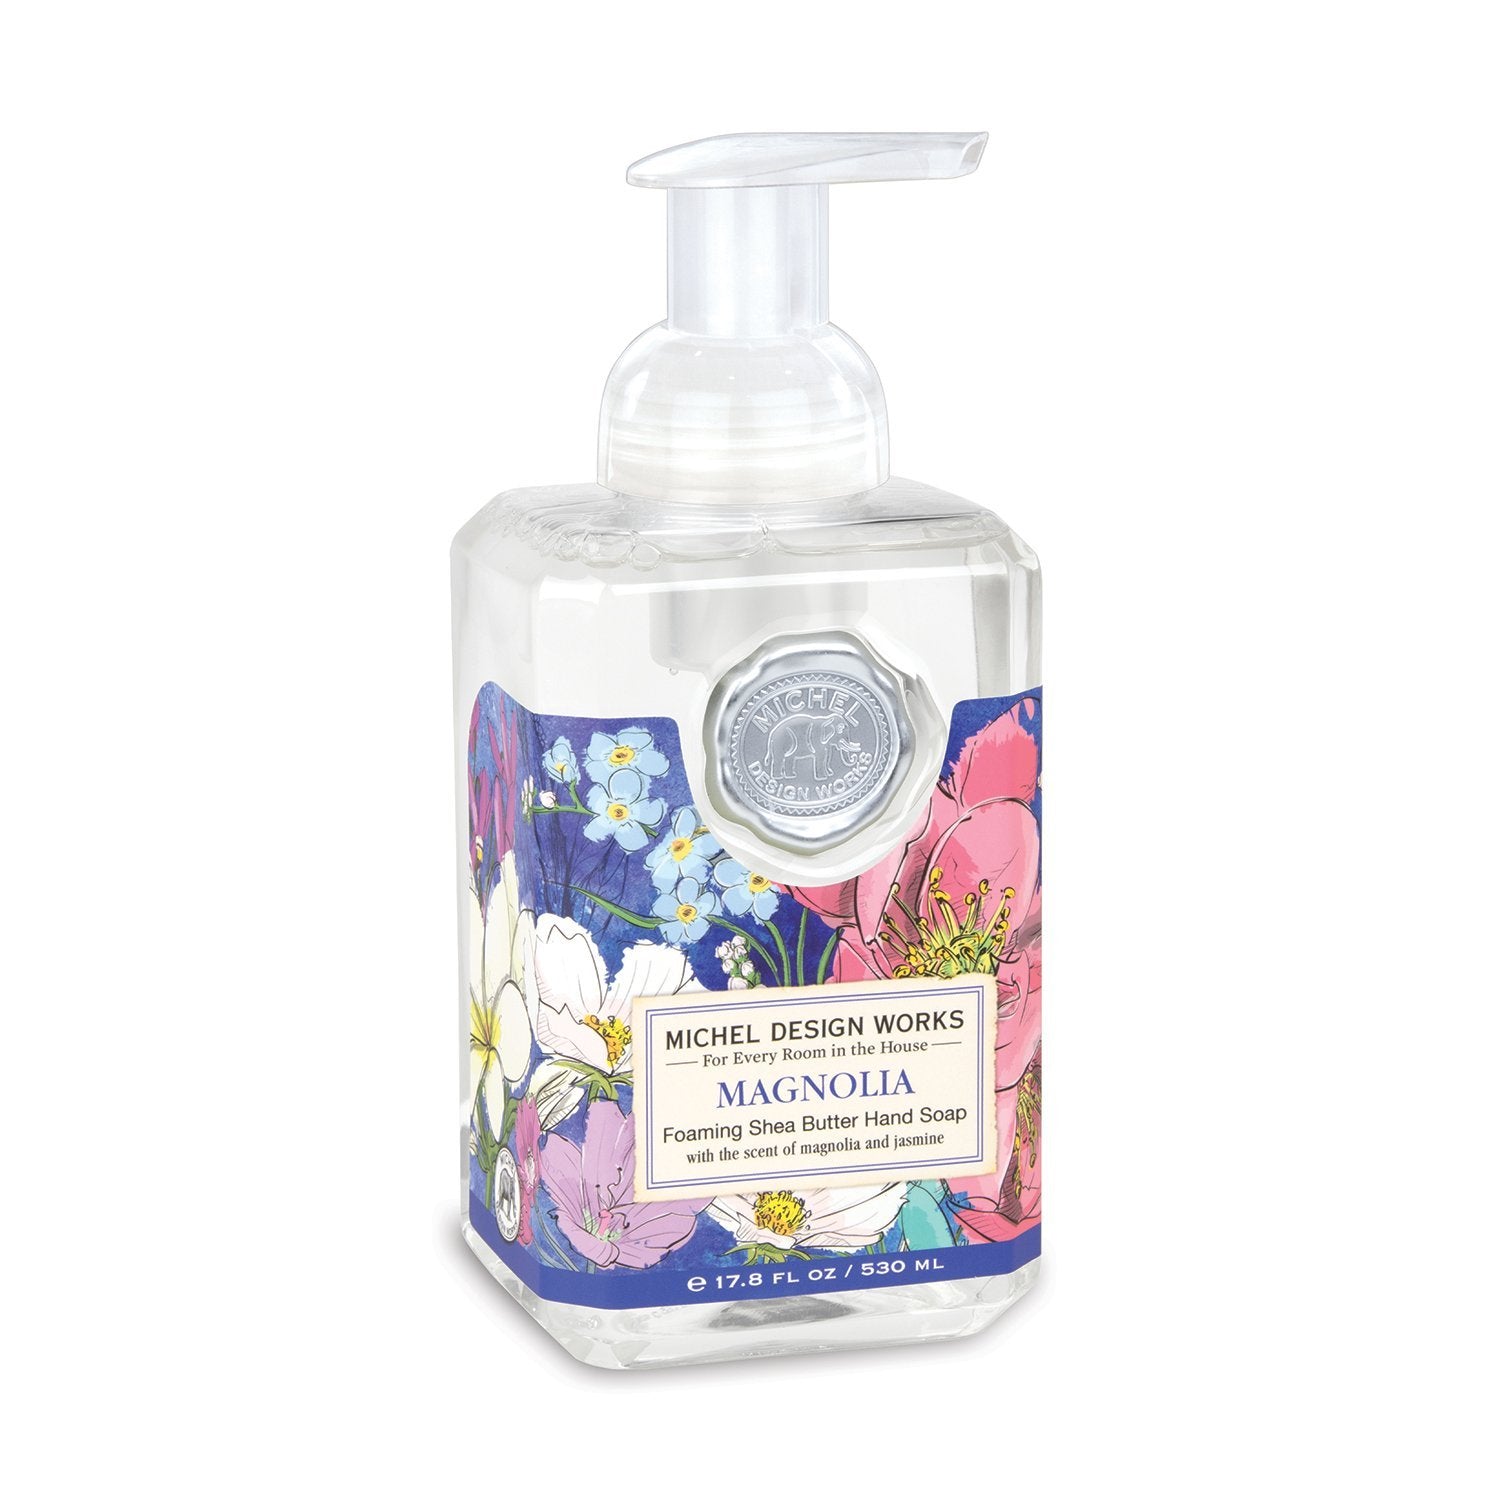 magnolia foaming soap rectangle bottle with clear plastic pump lid. label has a floral design with blue, white, pink poppies